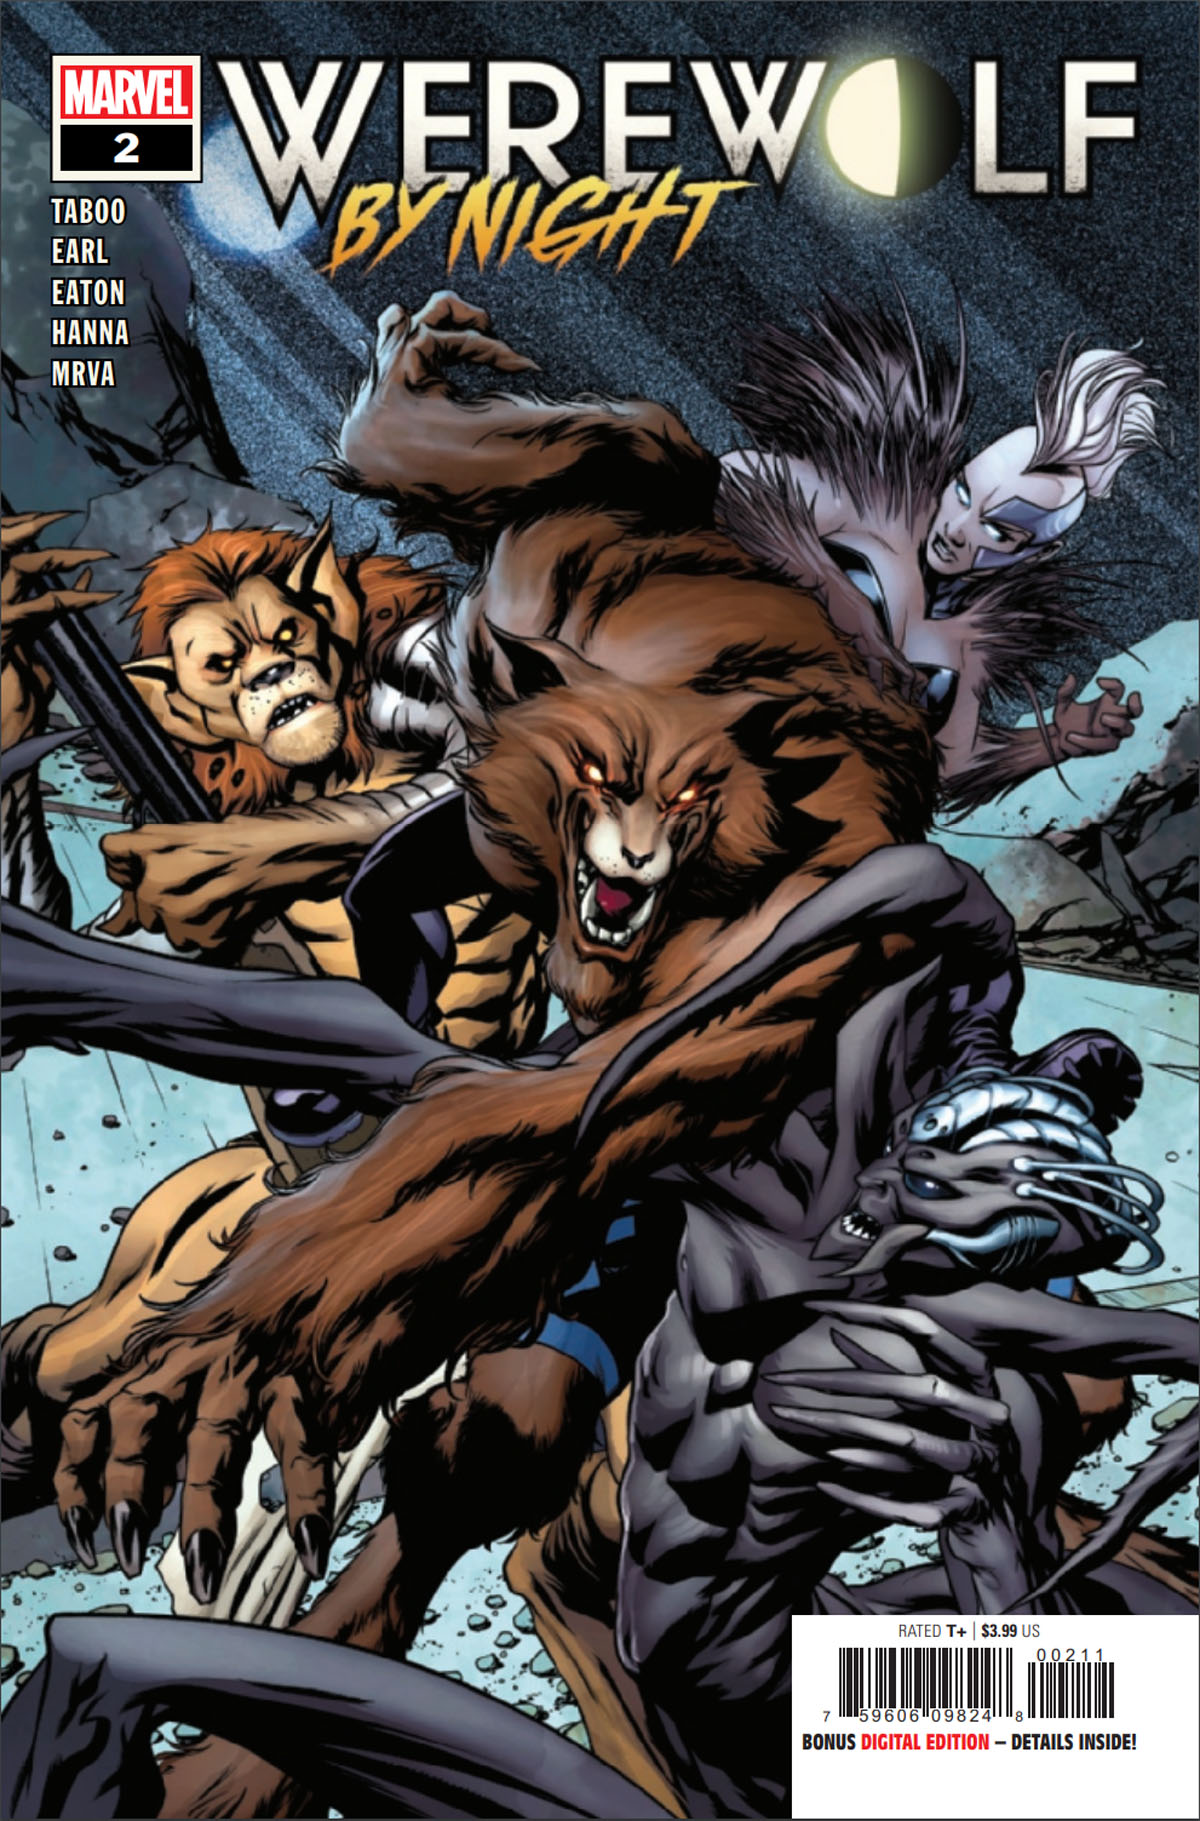 Werewolf by Night #2 cover